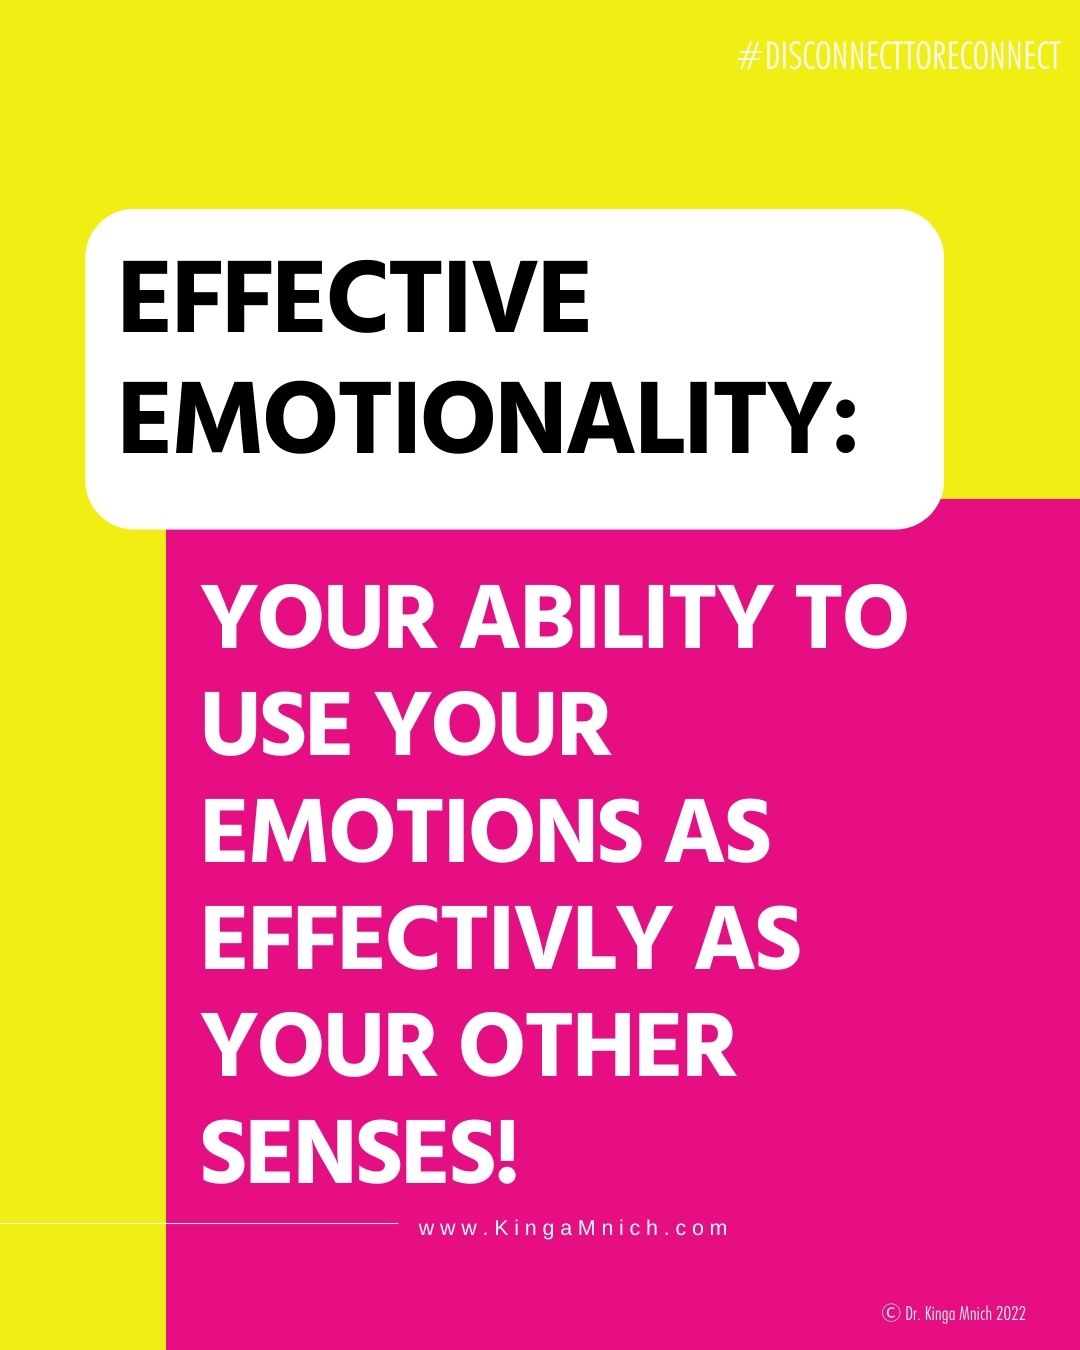 Effective Emotionality: Your Ability to use your emotions as effectively as your other senses!